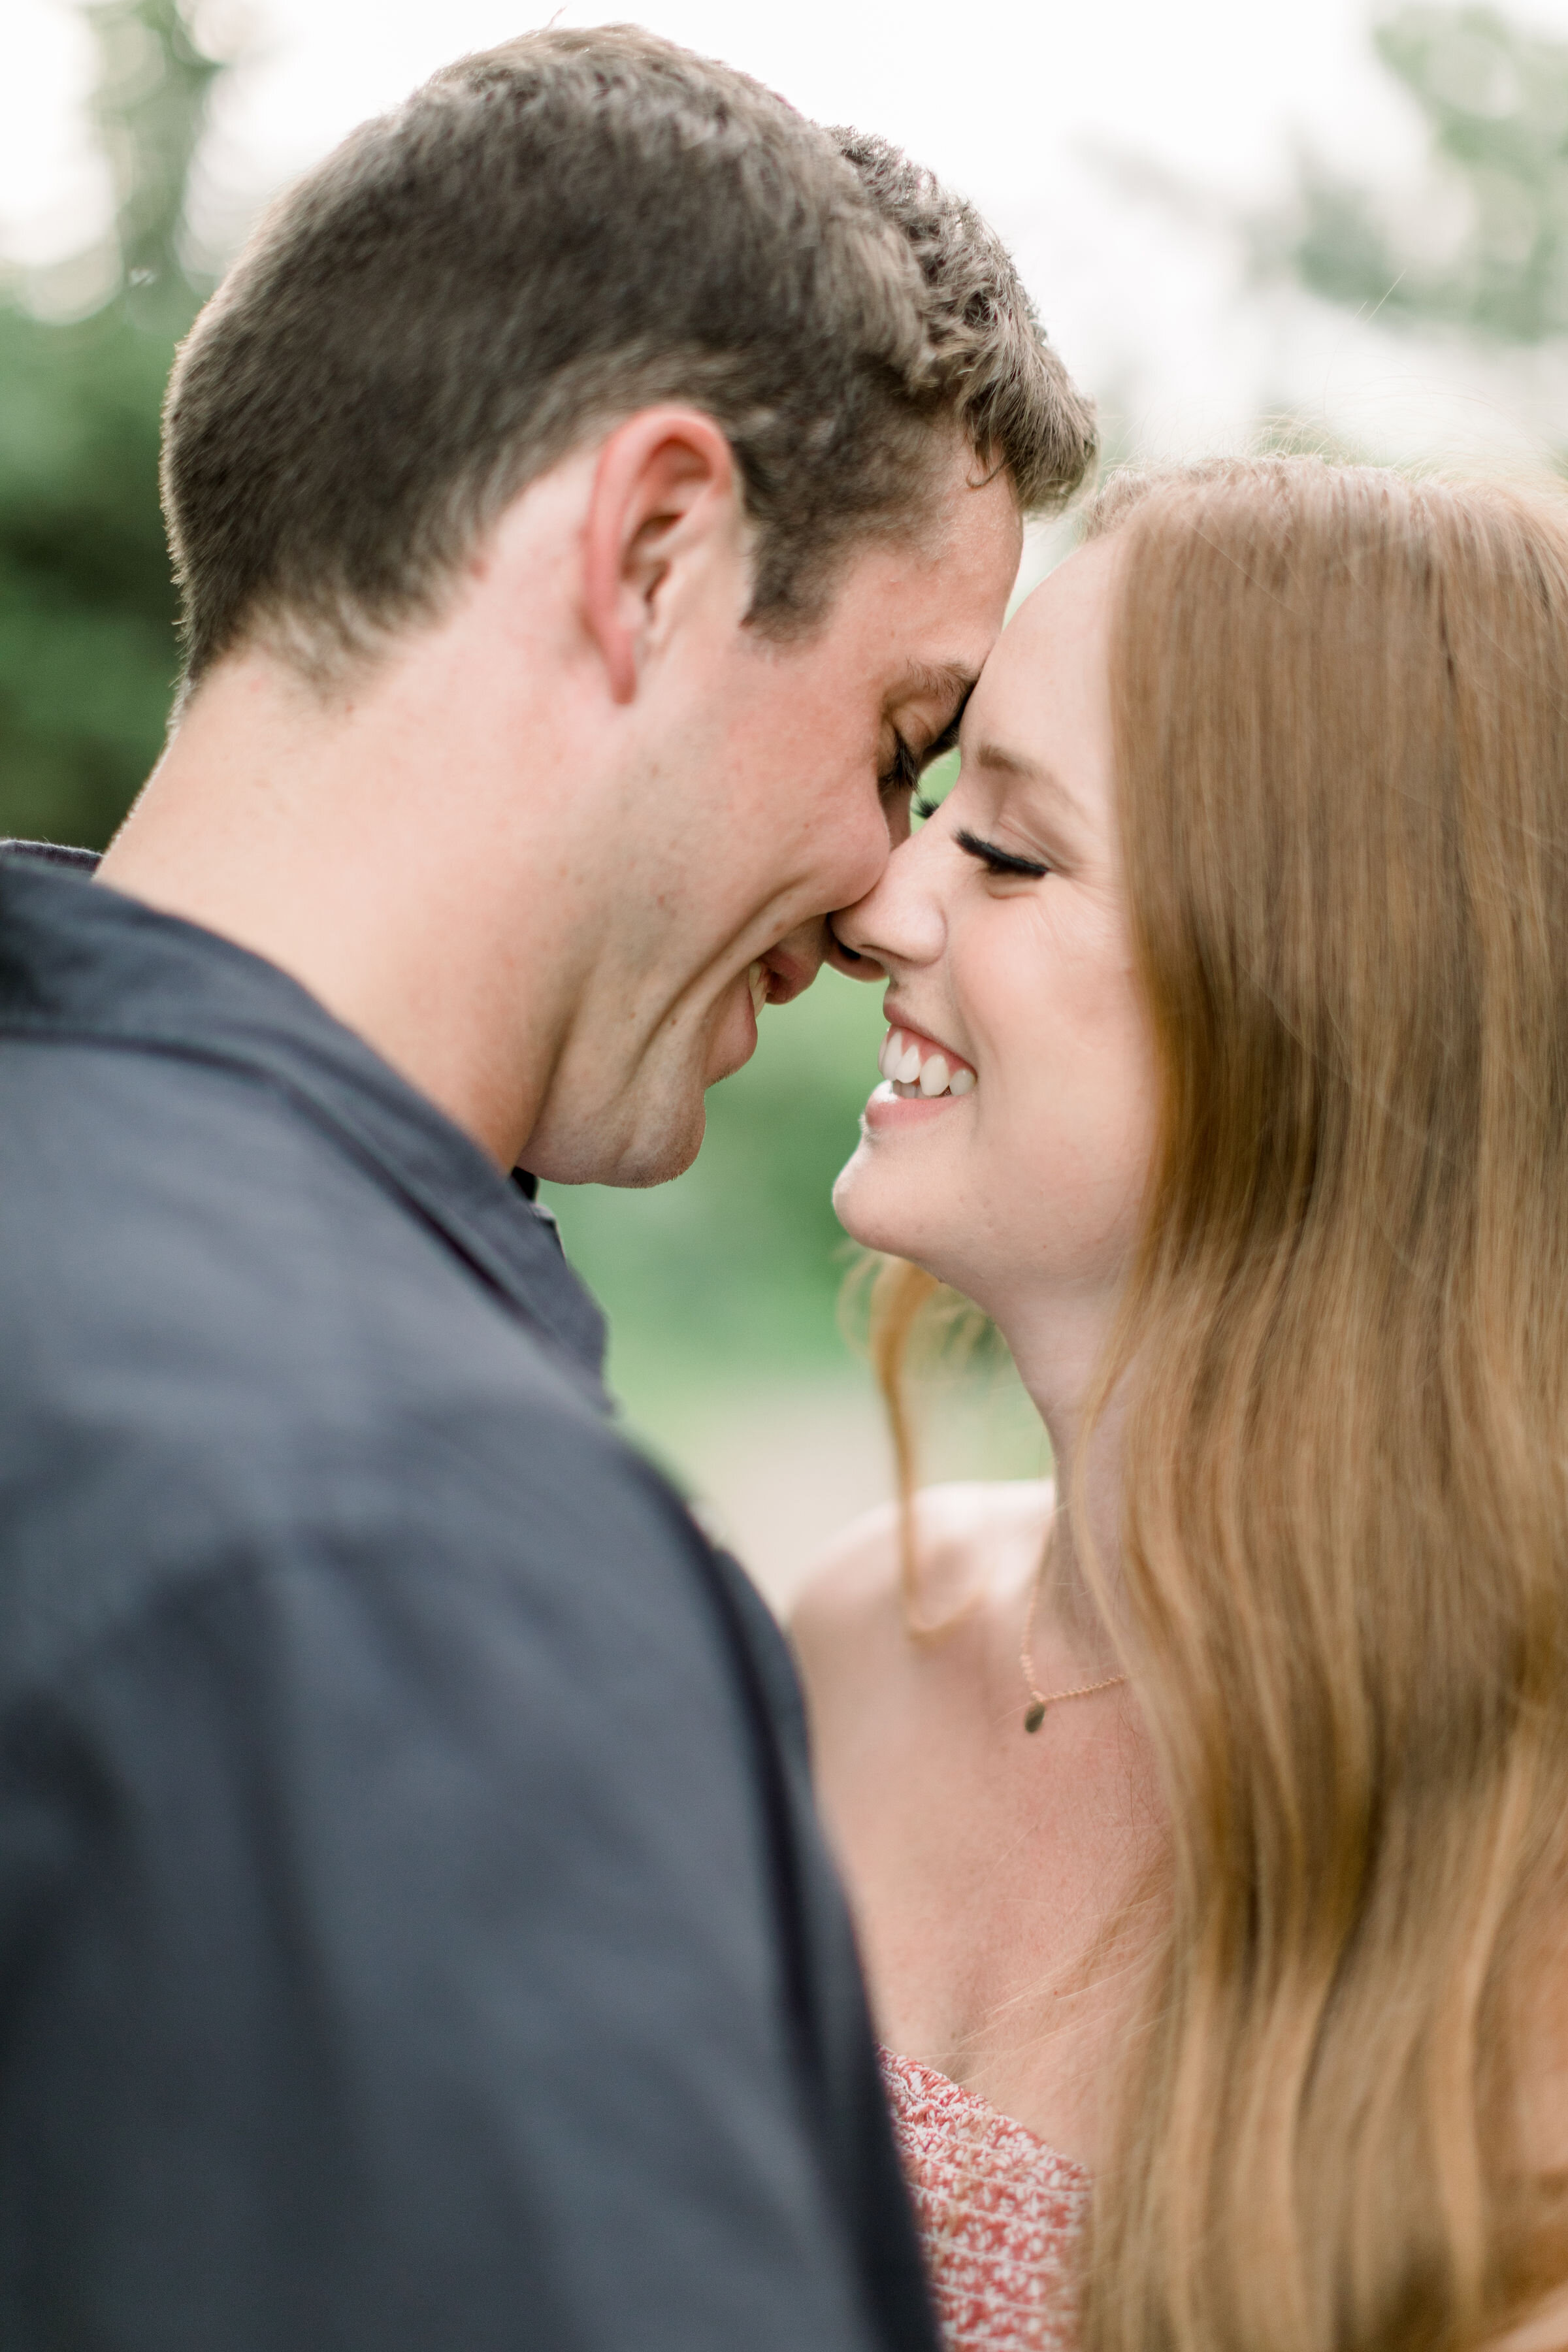  Arboretum, Ottawa photographer, Chelsea Mason Photography captures this couple playfully nuzzling noses while learning in for a smiling kiss. playful kissing couples photos engagement poses arboretum Ottawa photographer #ChelseaMasonPhotography #The